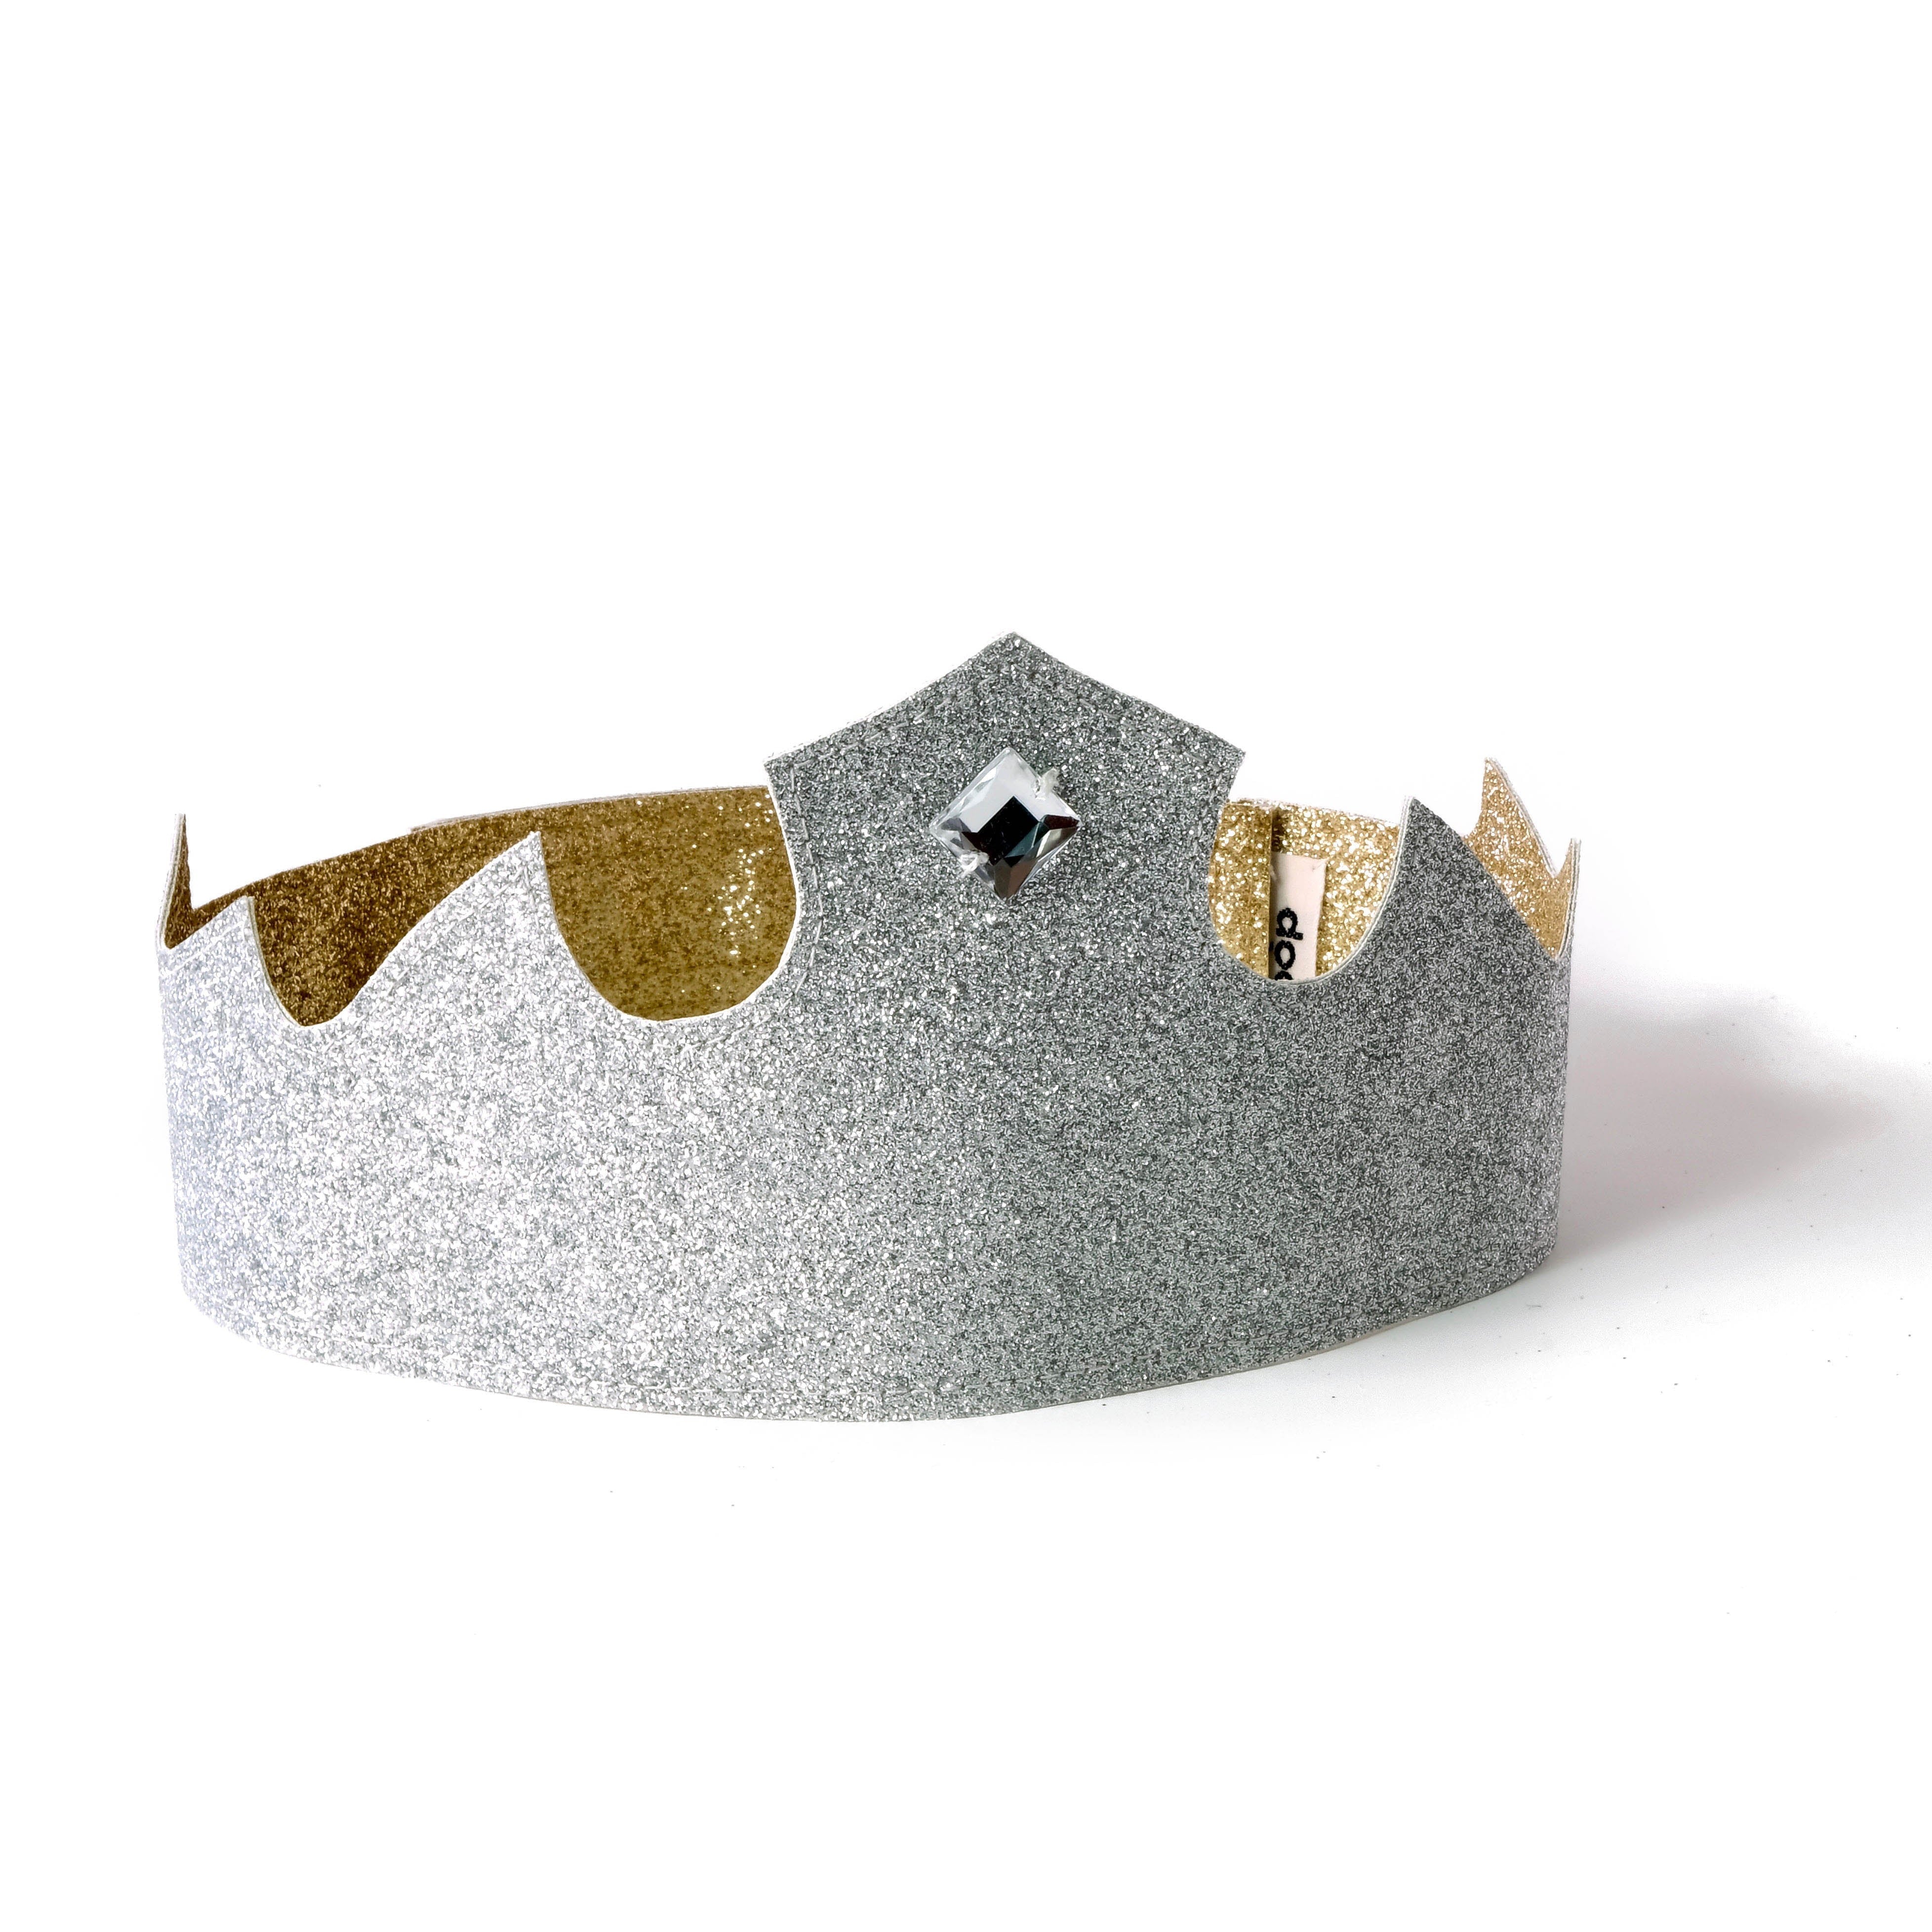 Combination silver and gold pretend play crown for kids of all ages.  It reversible and adjustable and will make you child's imagination go wild.